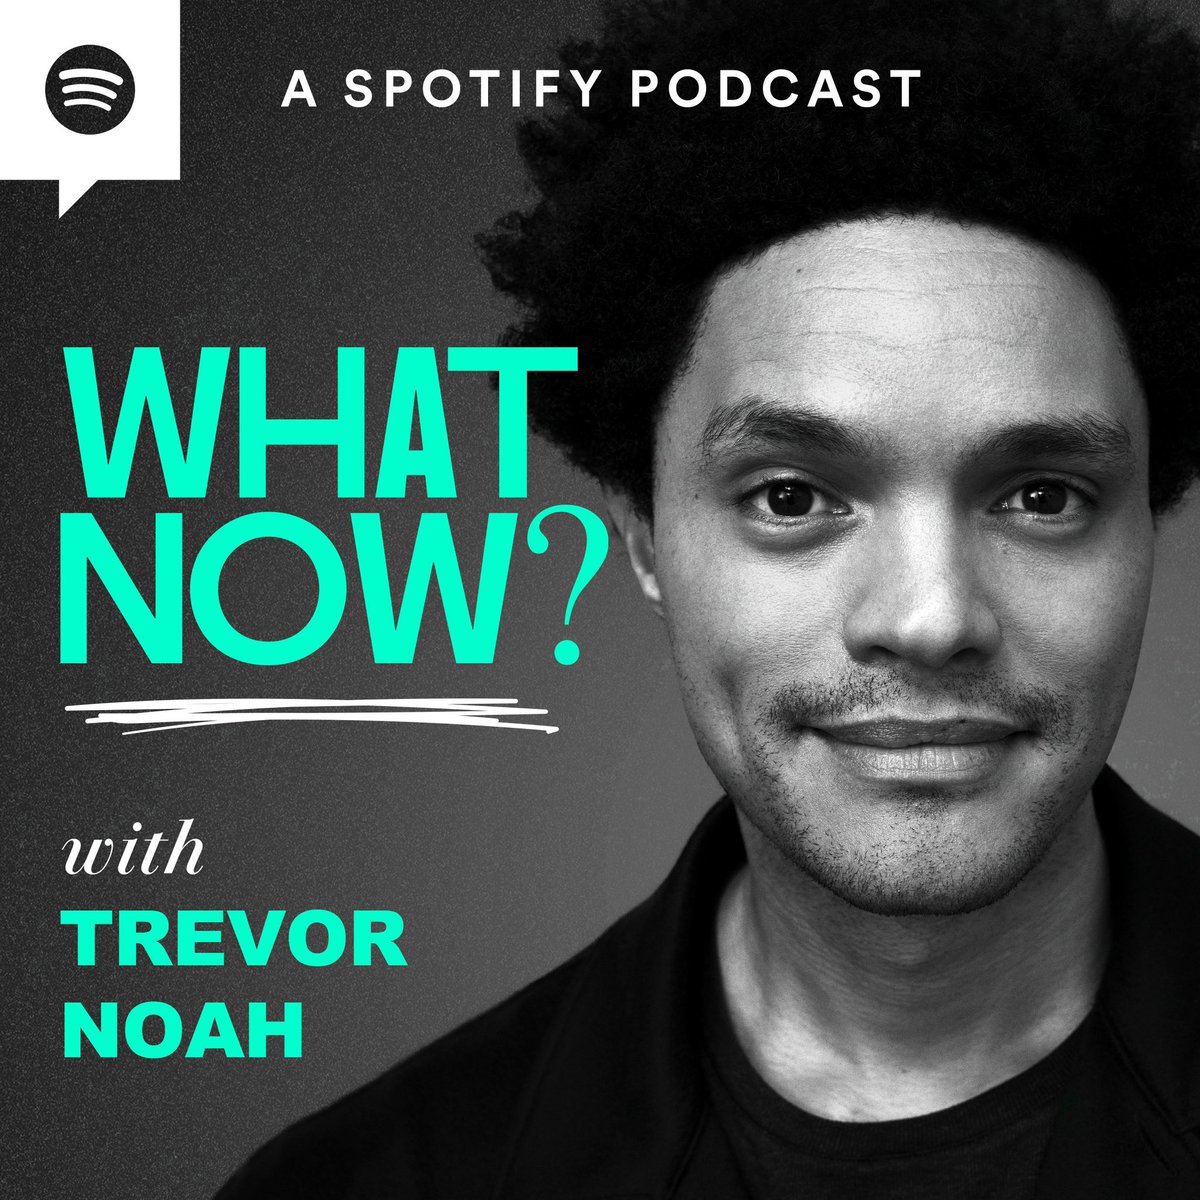 surprise! i’ve been making this show with @Trevornoah for months and it’s out today, in both audio *and* video form! our first guest is @TheRock (nbd!). many more pinch-me-am-i-dreaming guests to come! open.spotify.com/show/122imavAT…